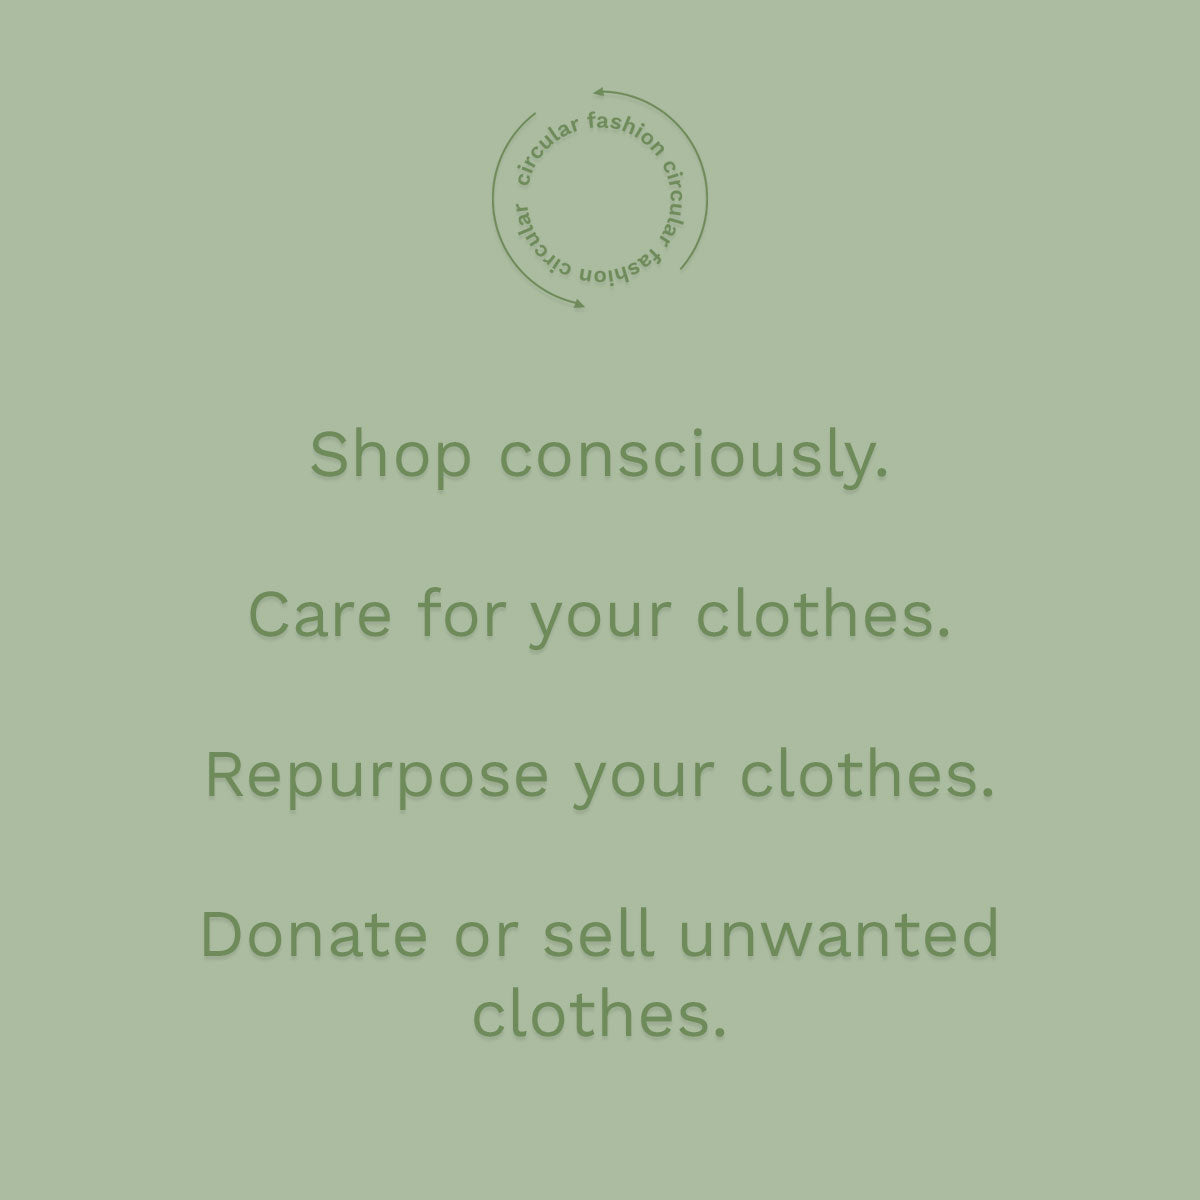 shop-consciously-recycle-circularity-sustainable-fashion